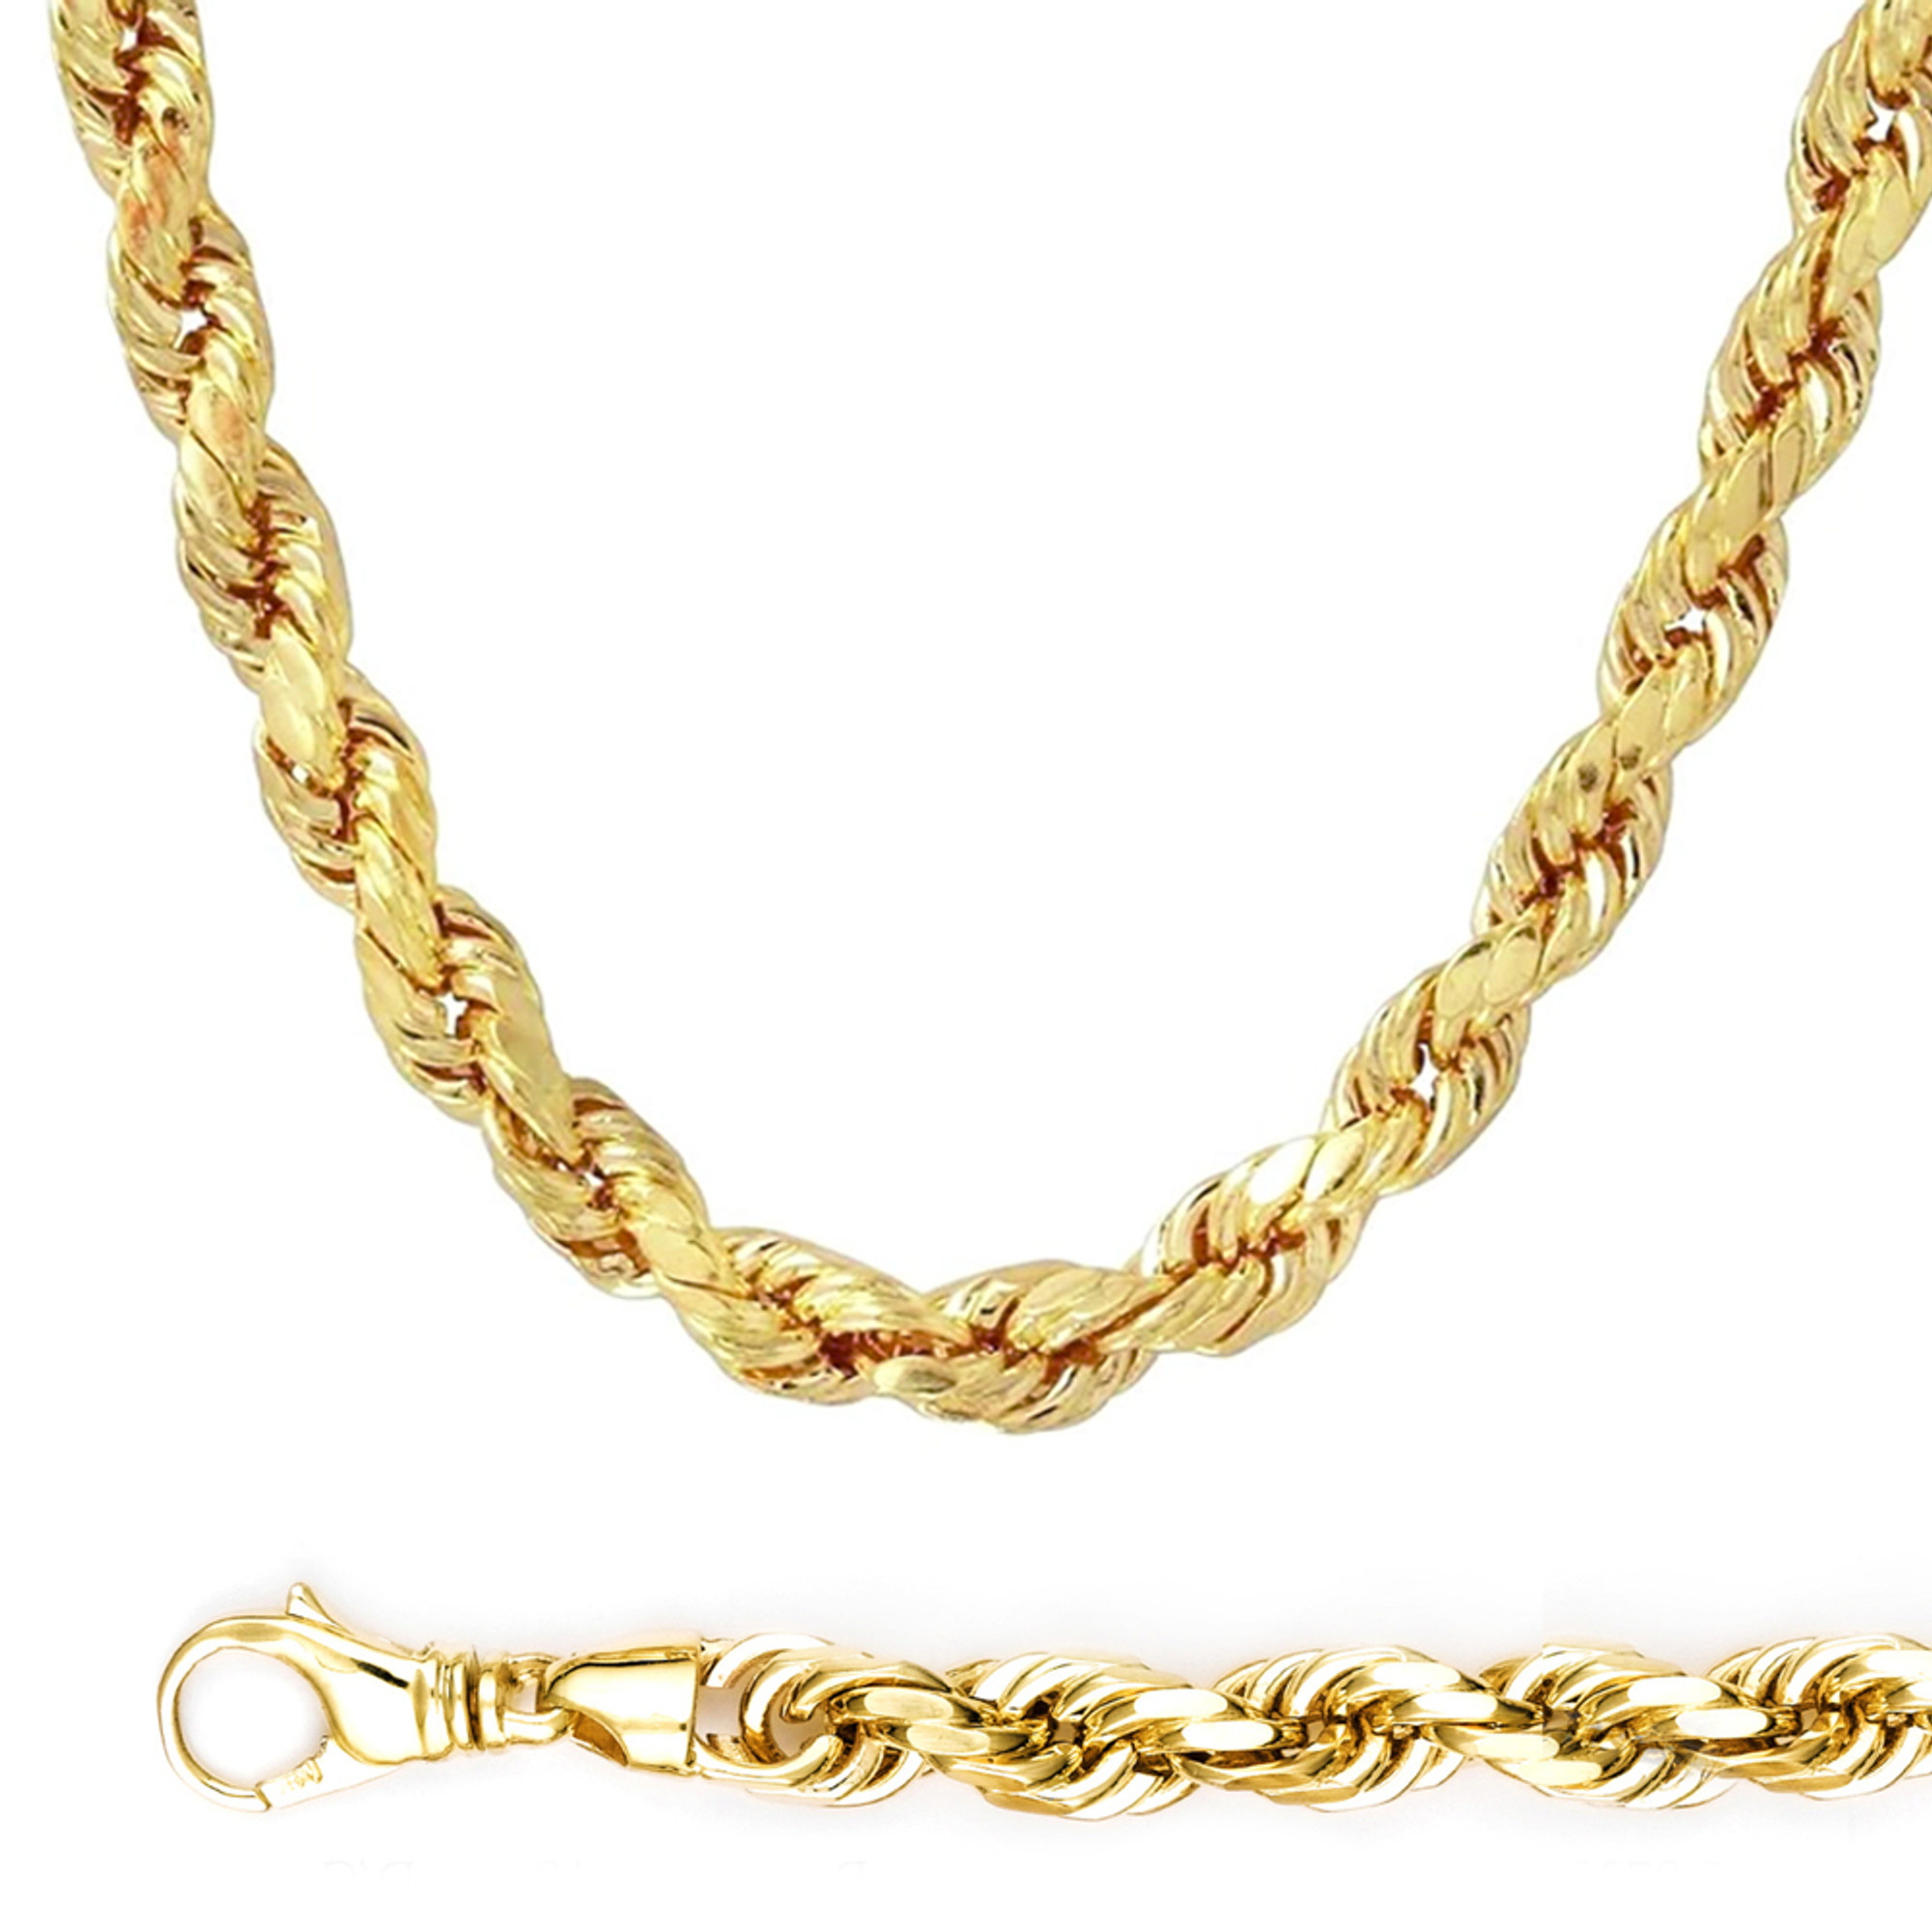 Mens Miami Cuban Link Chain 22-Inch 3.2mm Solid 14K Yellow Gold